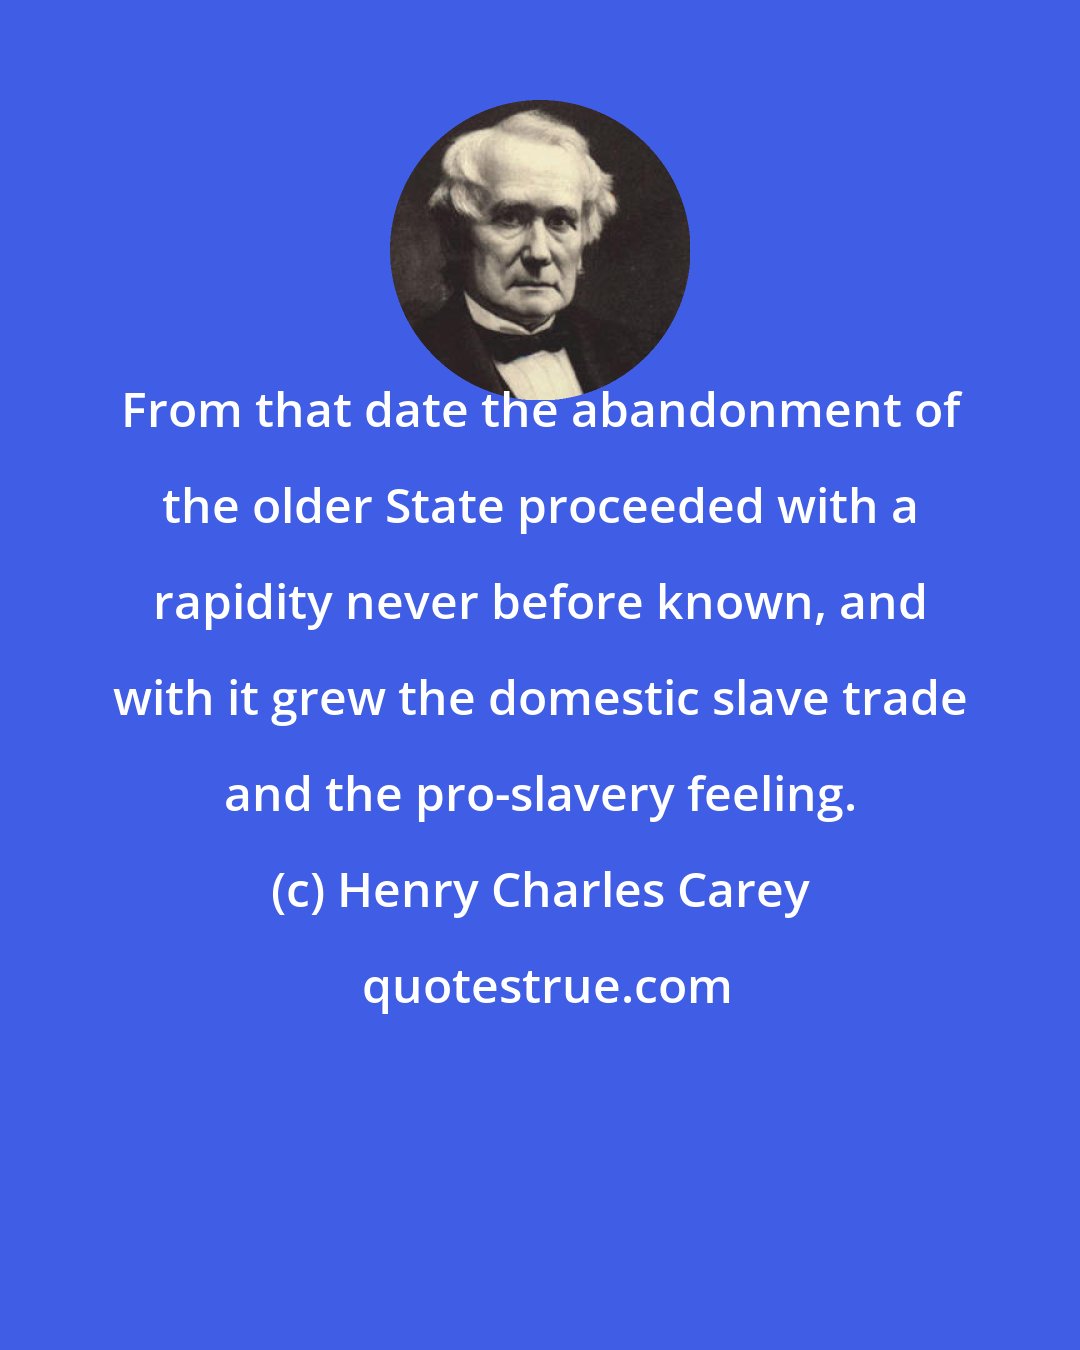 Henry Charles Carey: From that date the abandonment of the older State proceeded with a rapidity never before known, and with it grew the domestic slave trade and the pro-slavery feeling.